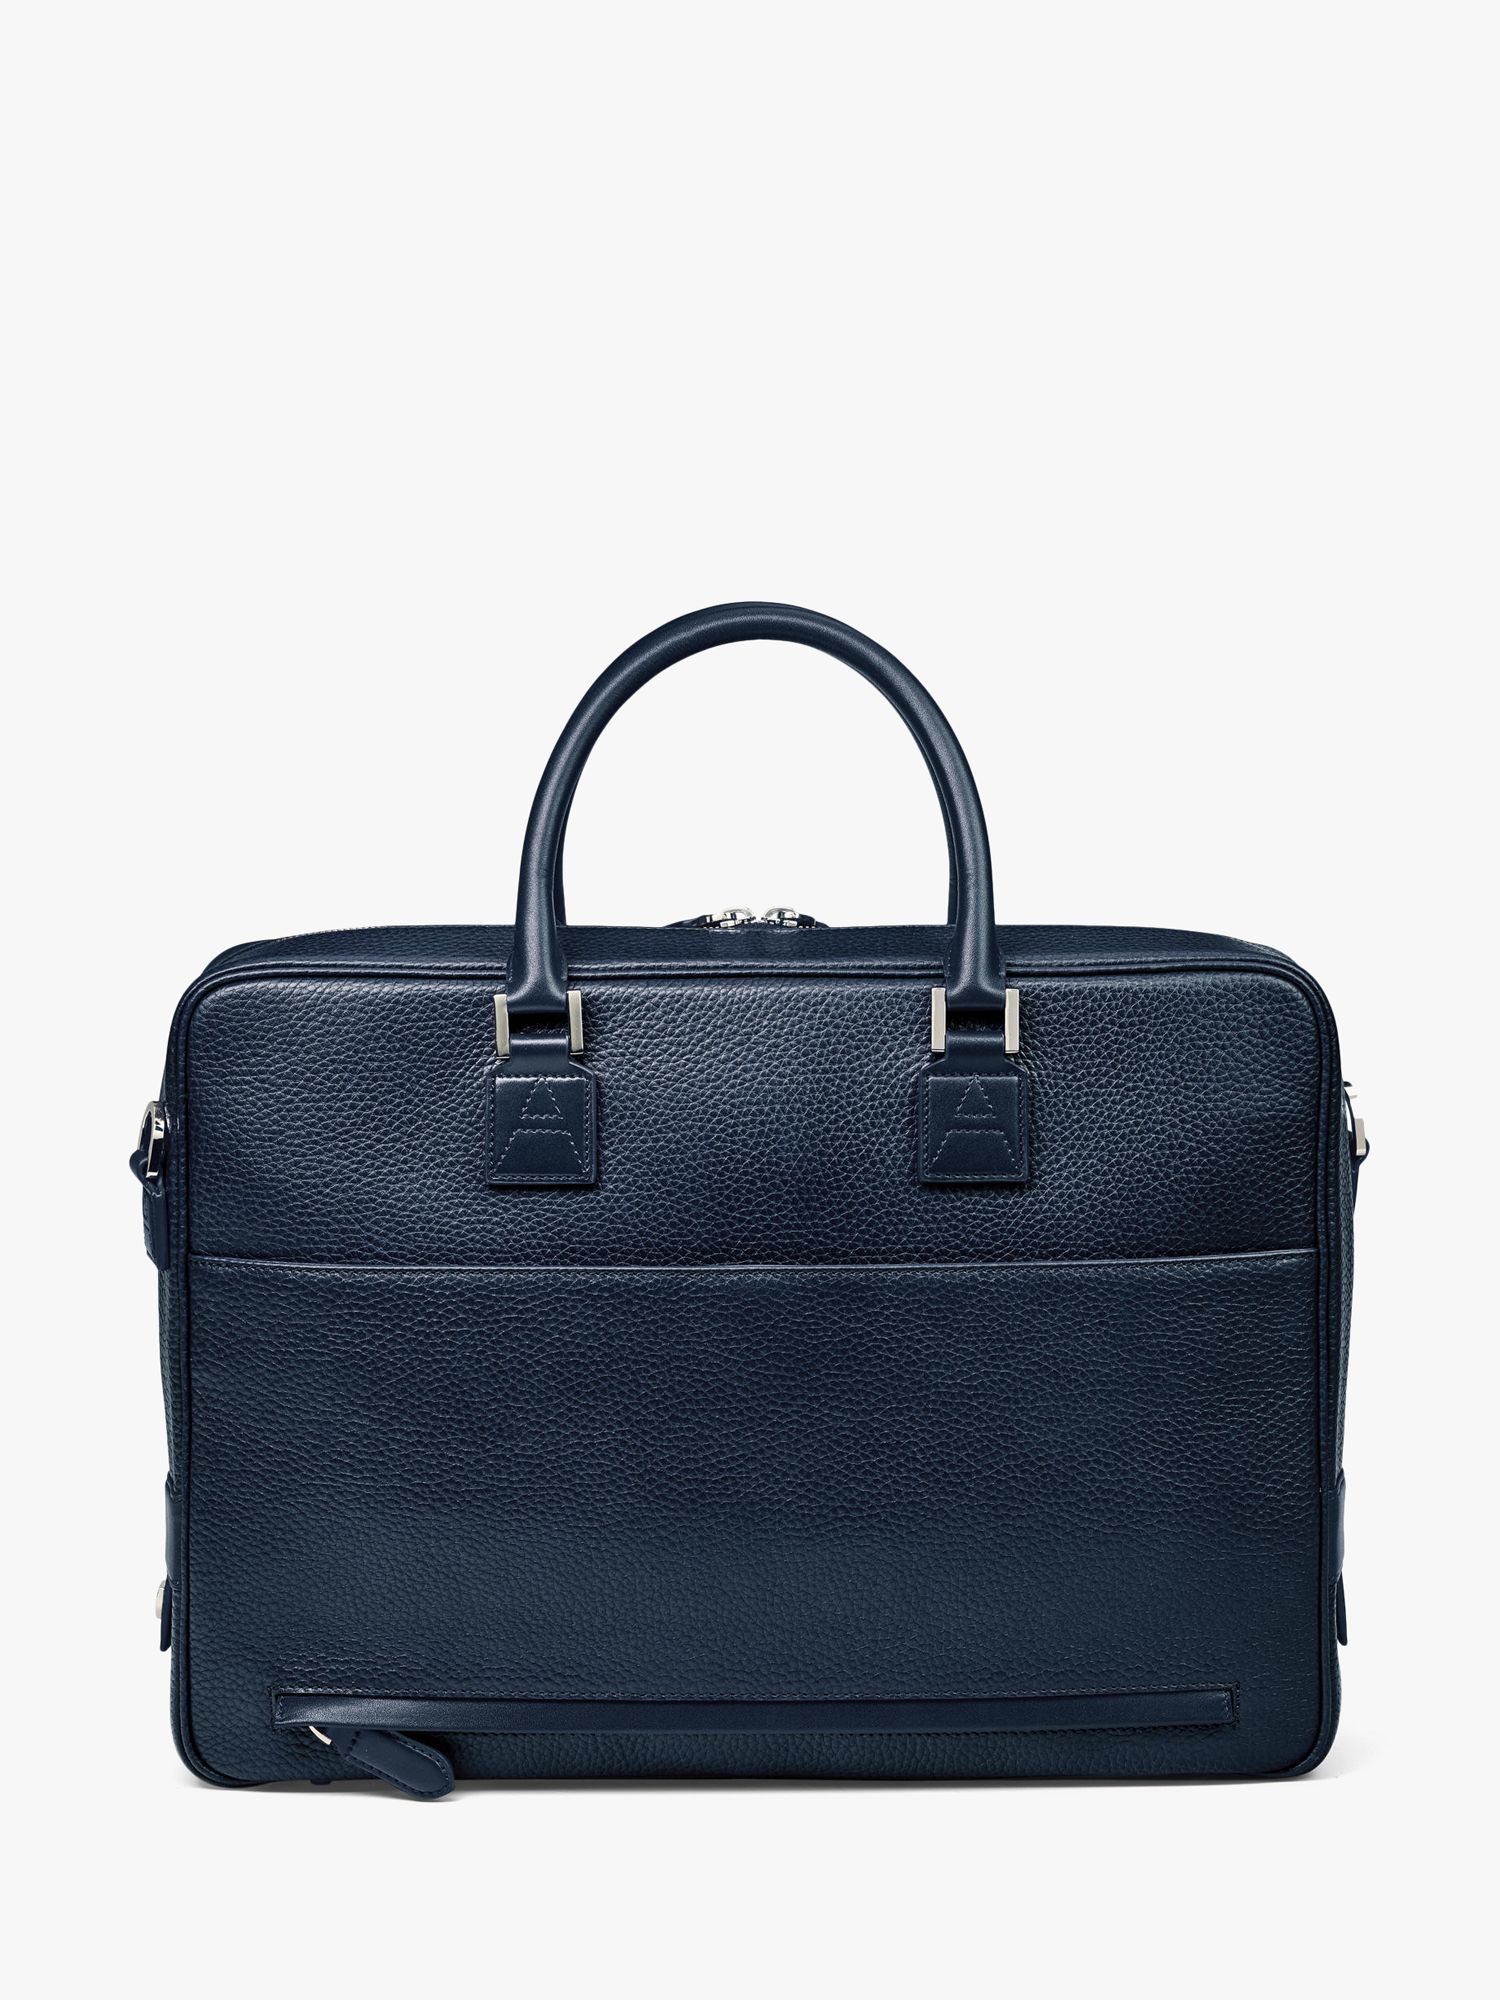 Aspinal of London Mount Street Small Pebble Grain Leather Laptop Bag, Navy